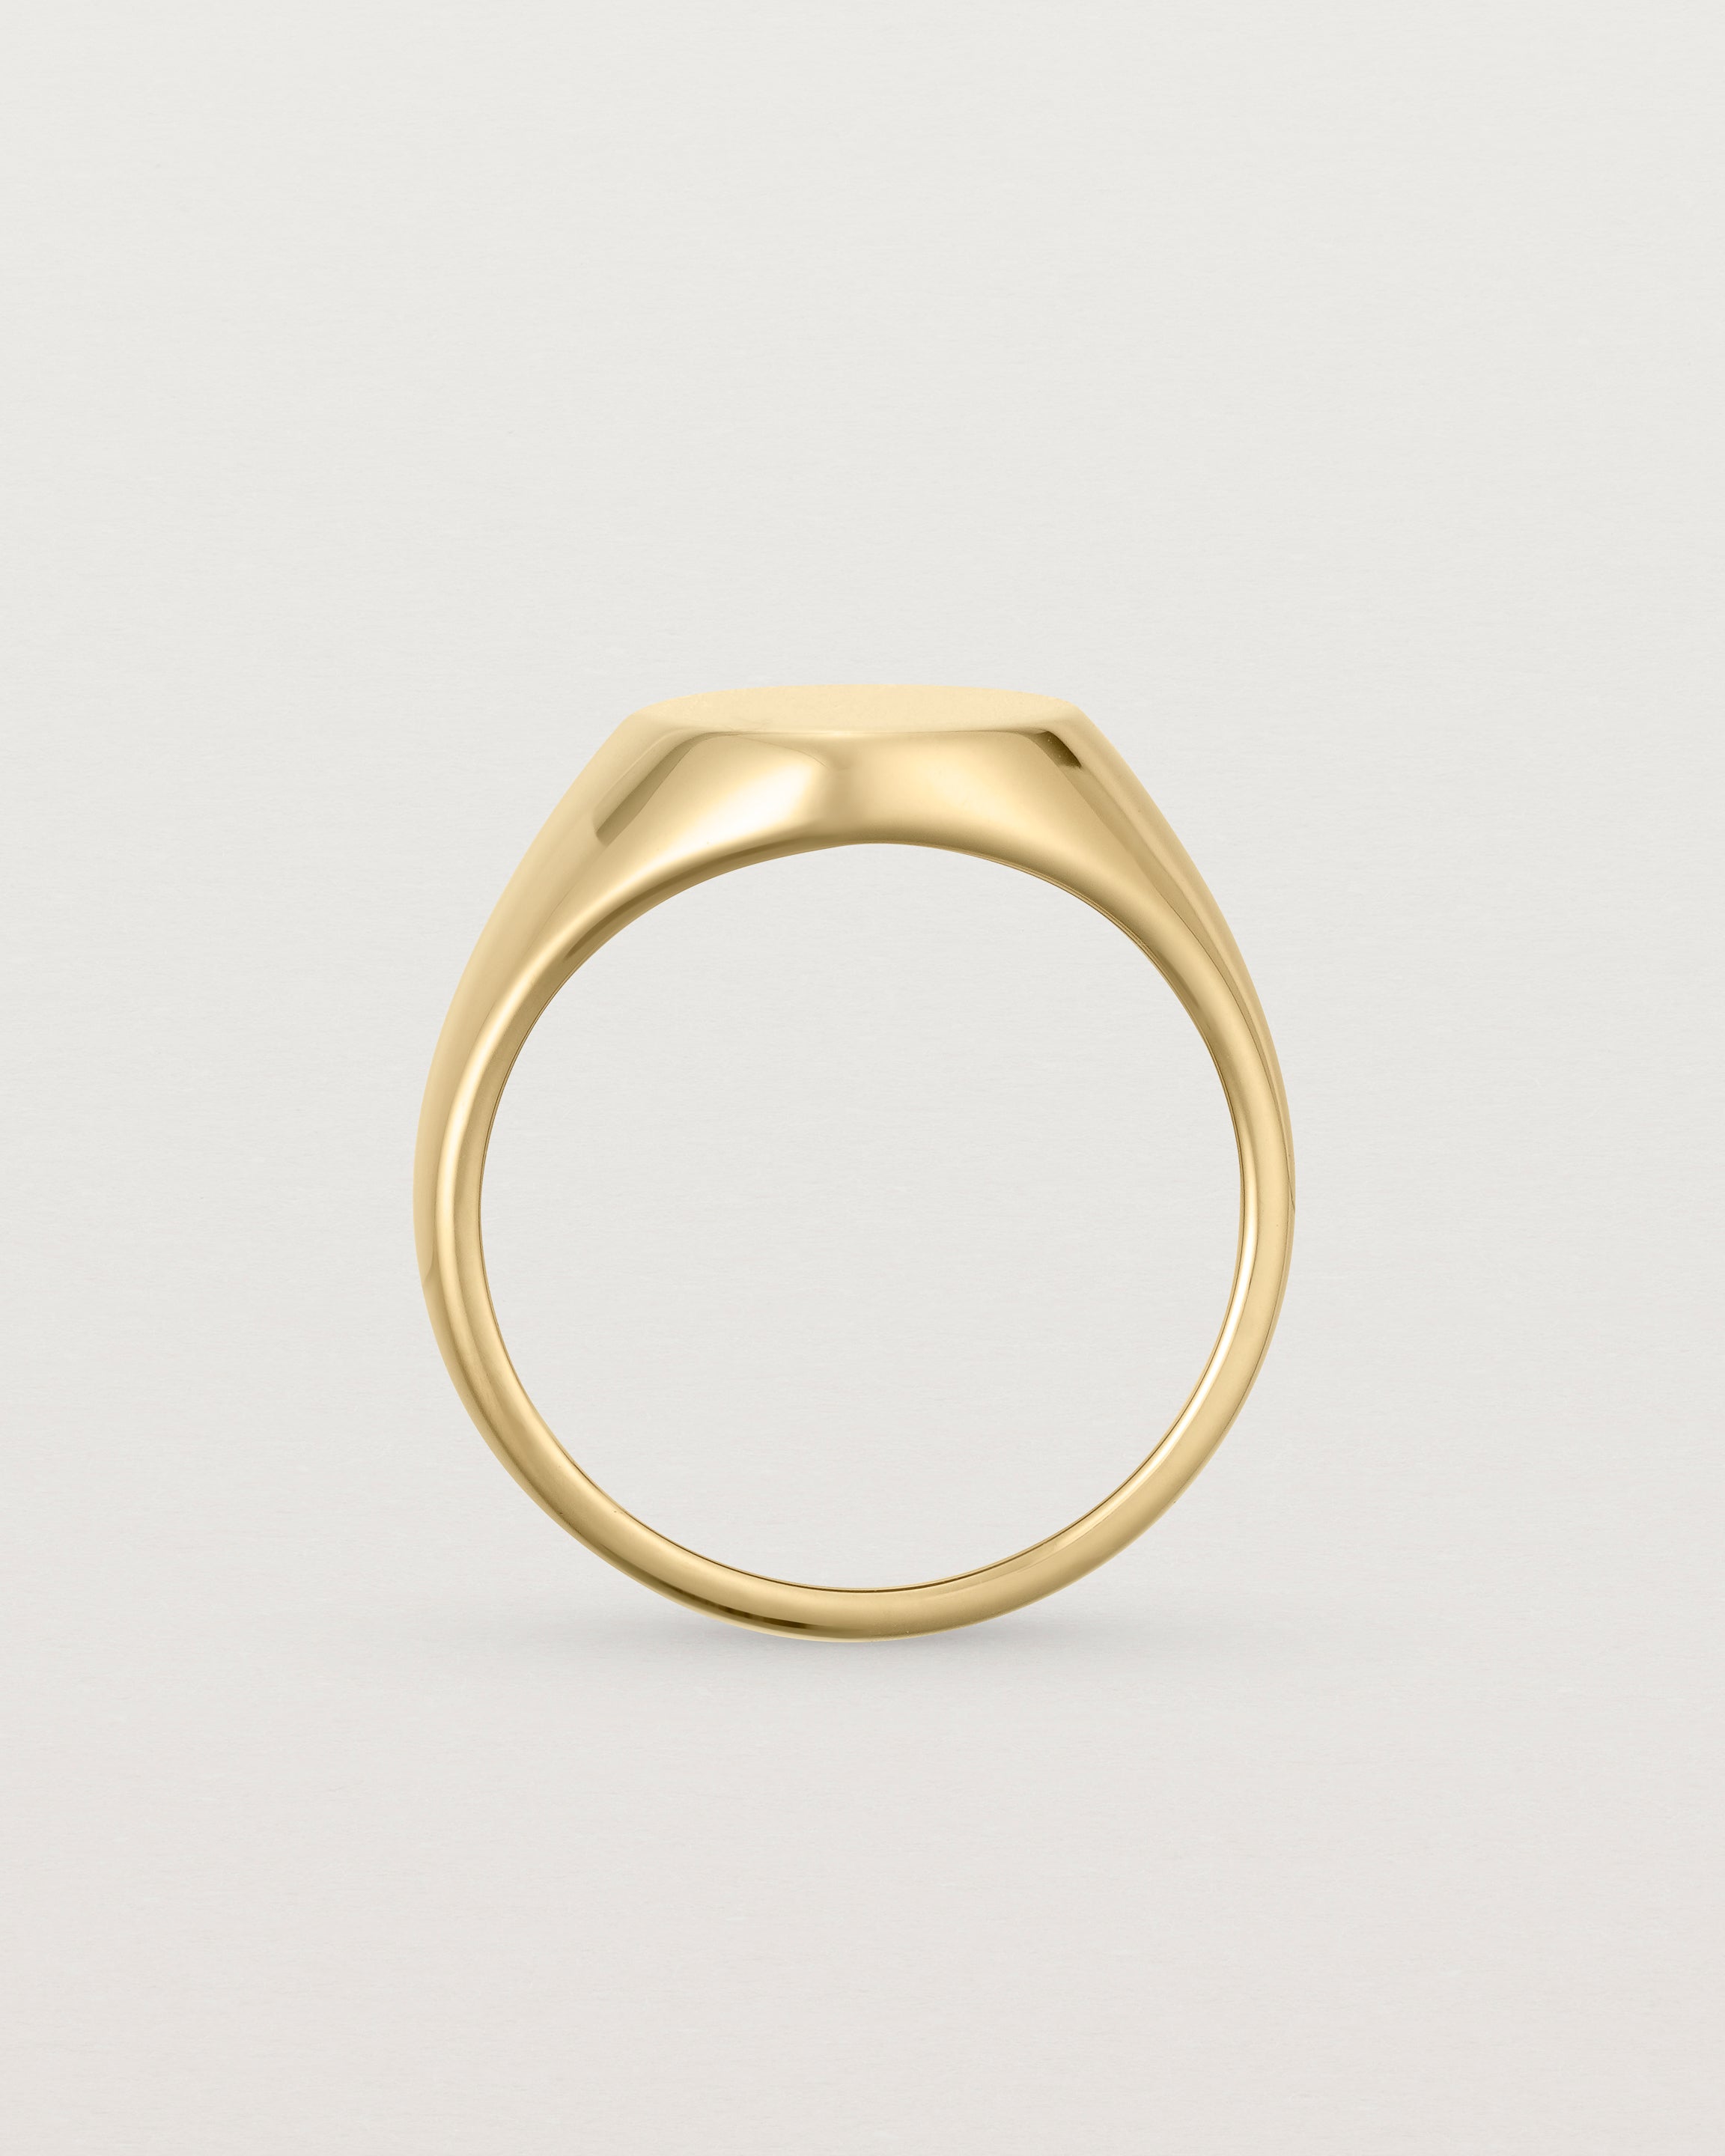 Standing view of the Kian Signet Ring | Yellow Gold.